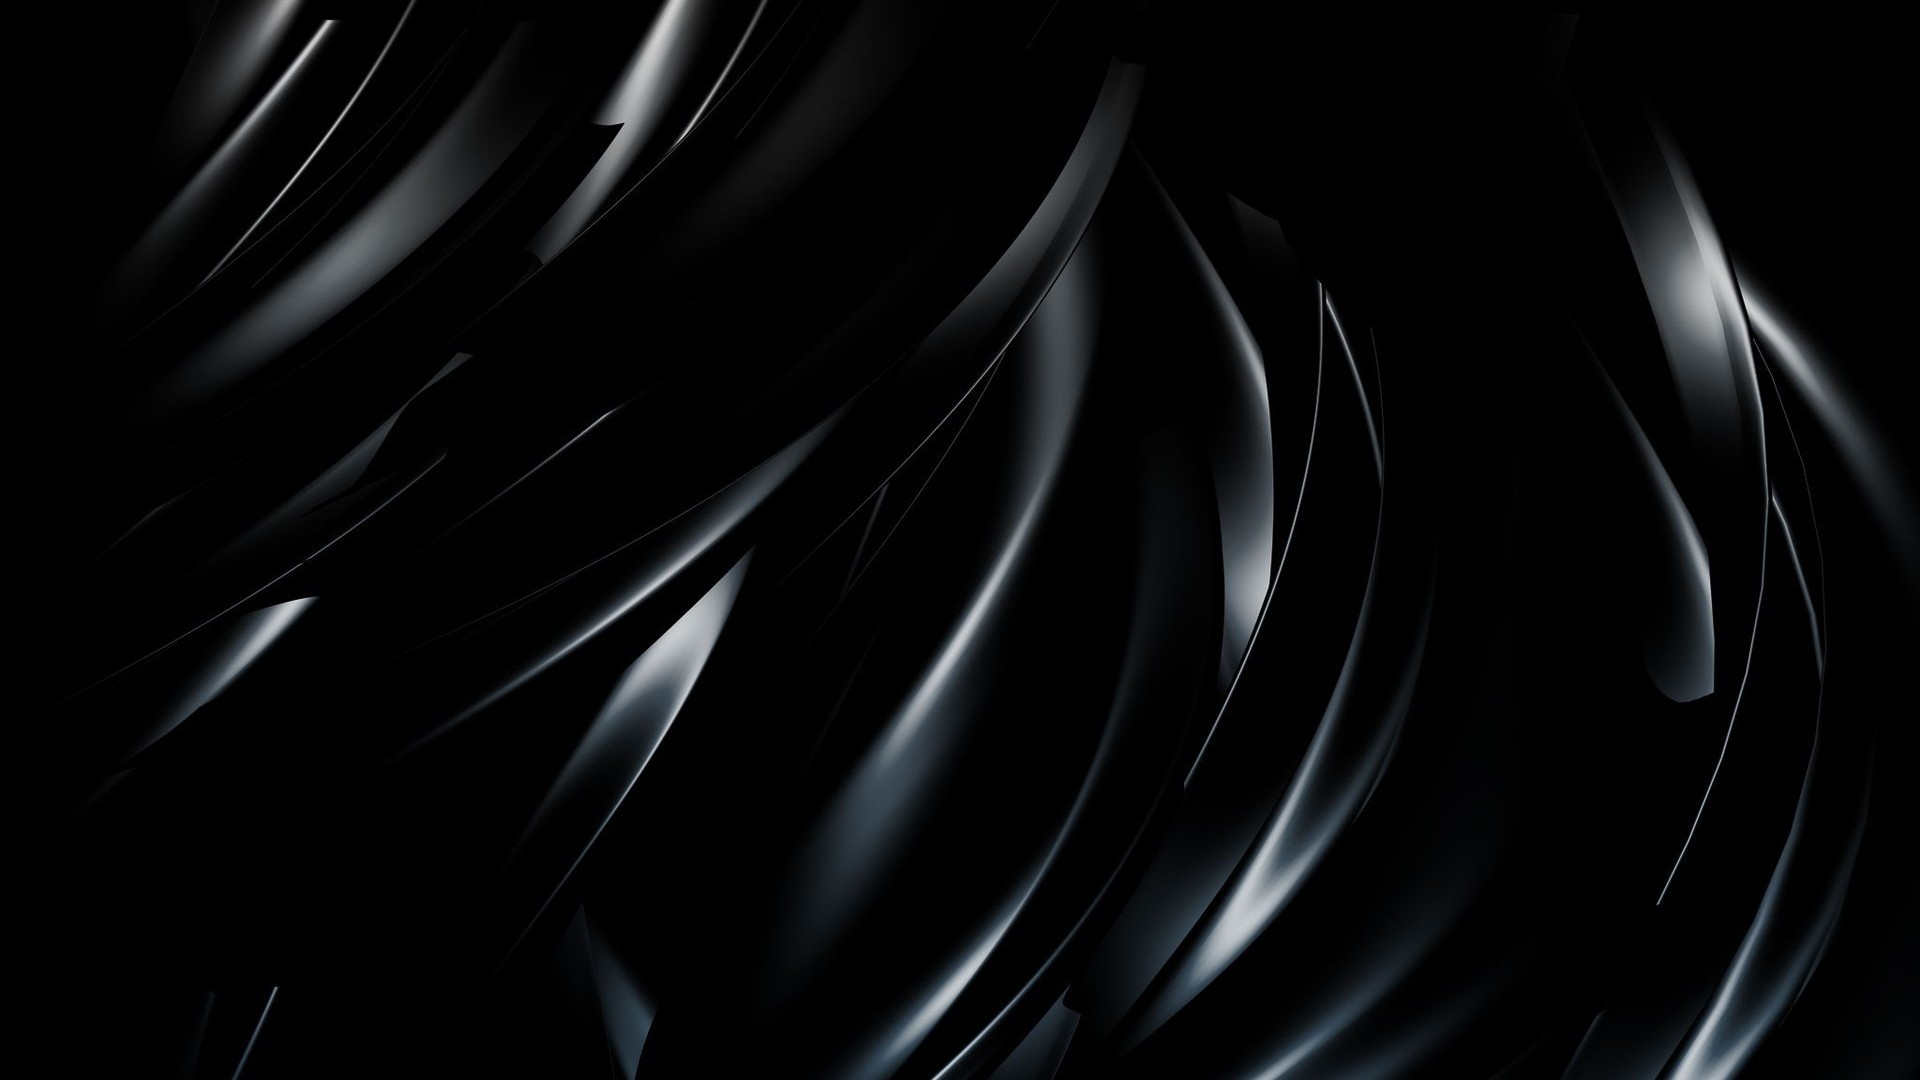 Collection of Black Wallpaper Abstract on HDWallpapers Wallpapers Abstract Black Wallpapers. Dark Wallpaper